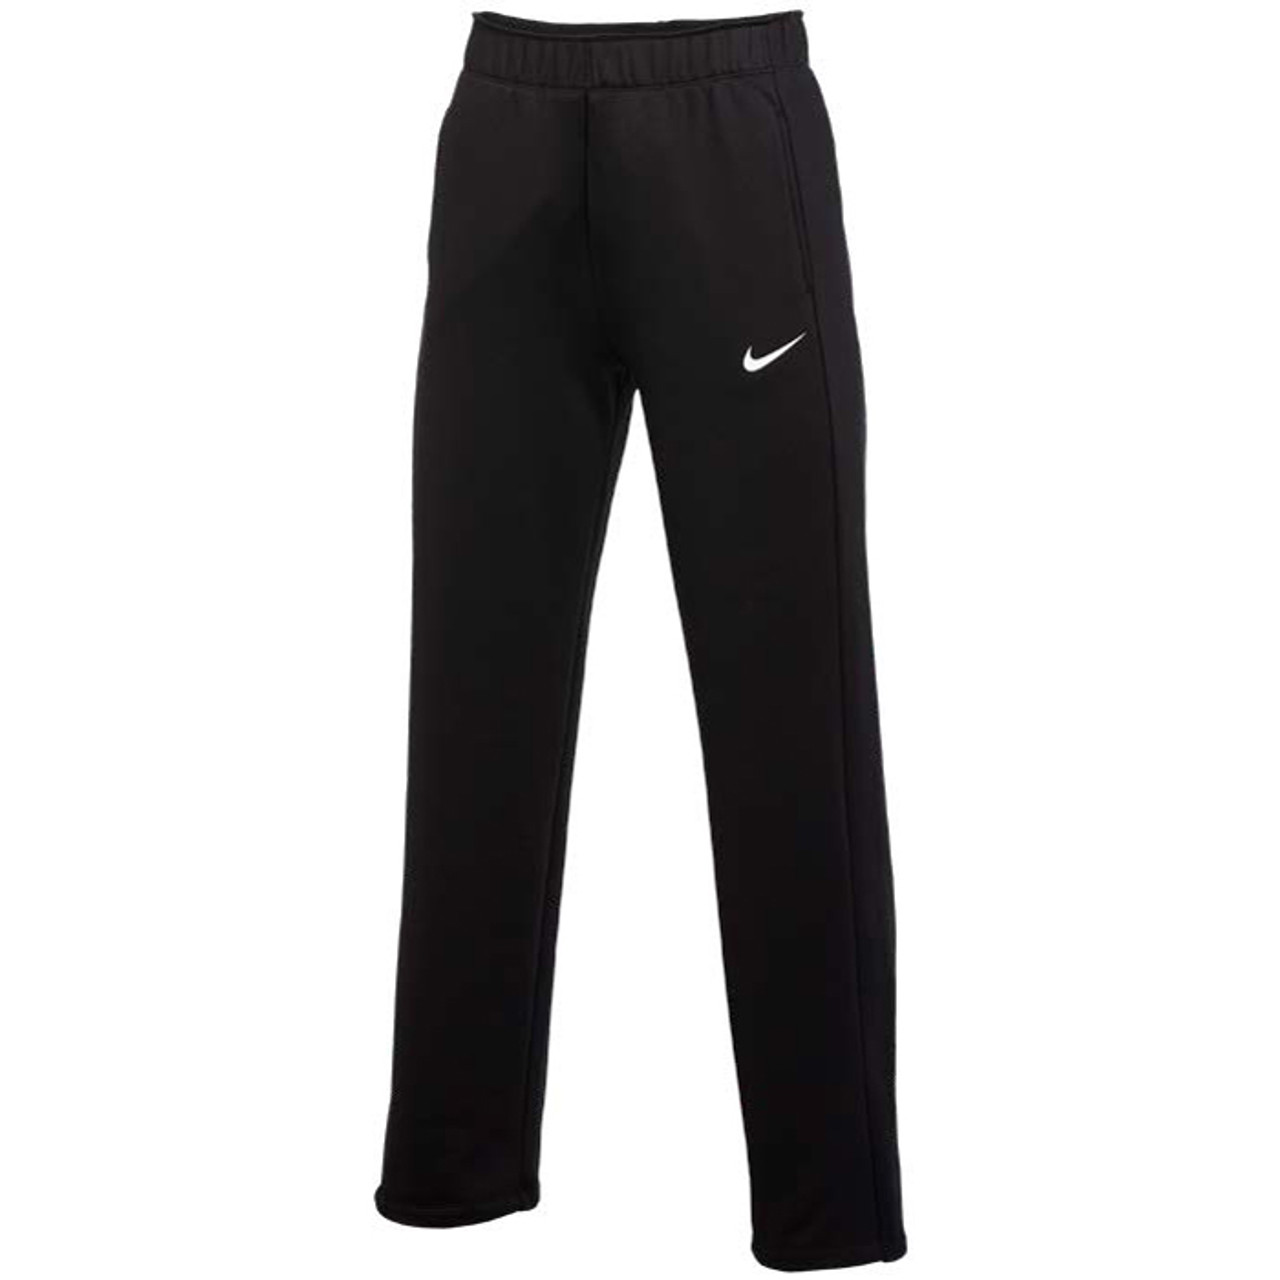 San Francisco Giants Nike Women's All-Time Therma Performance